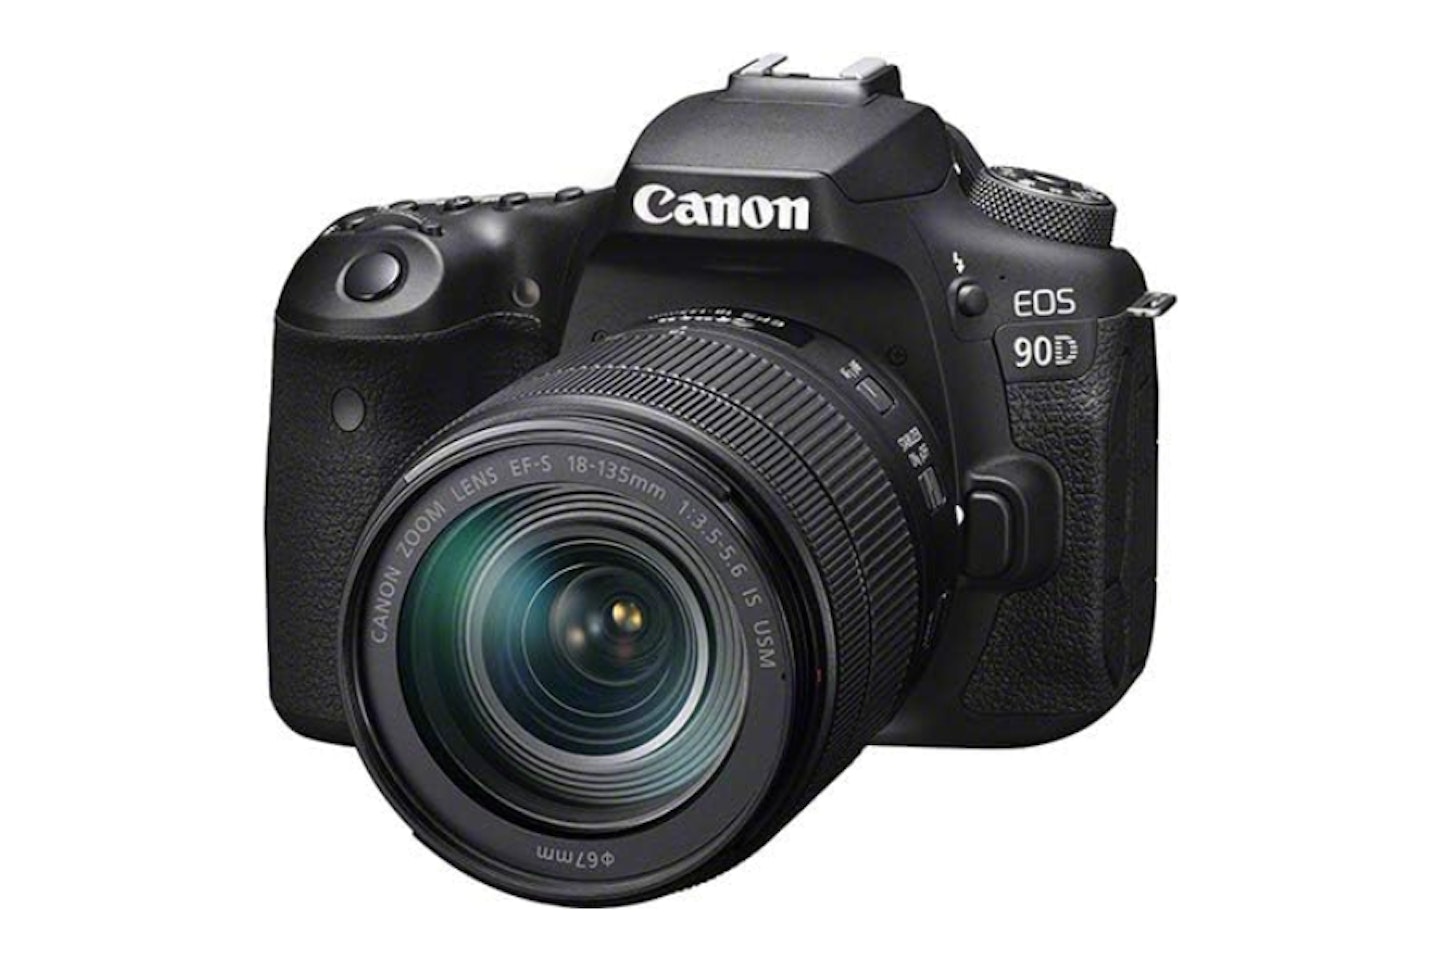 Canon EOS 90D - one of the best budget DSLR cameras